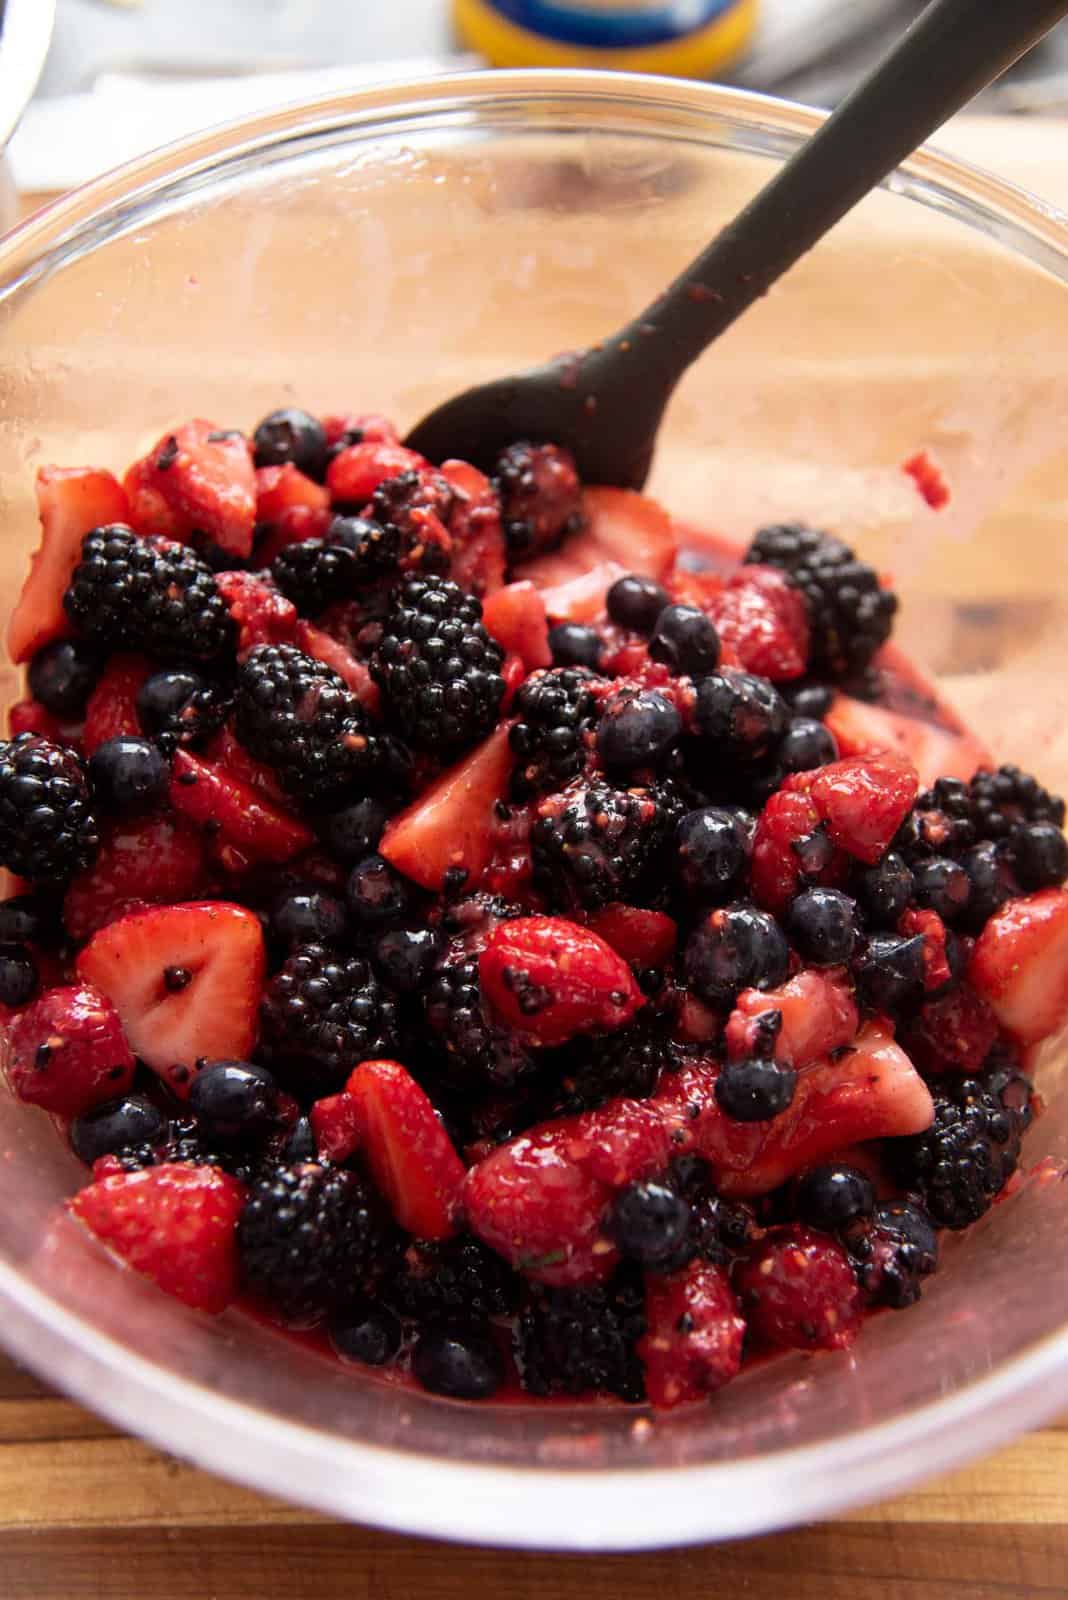 A bowl of berries with whole and crushed berries mixed, with a spatula in the bowl.